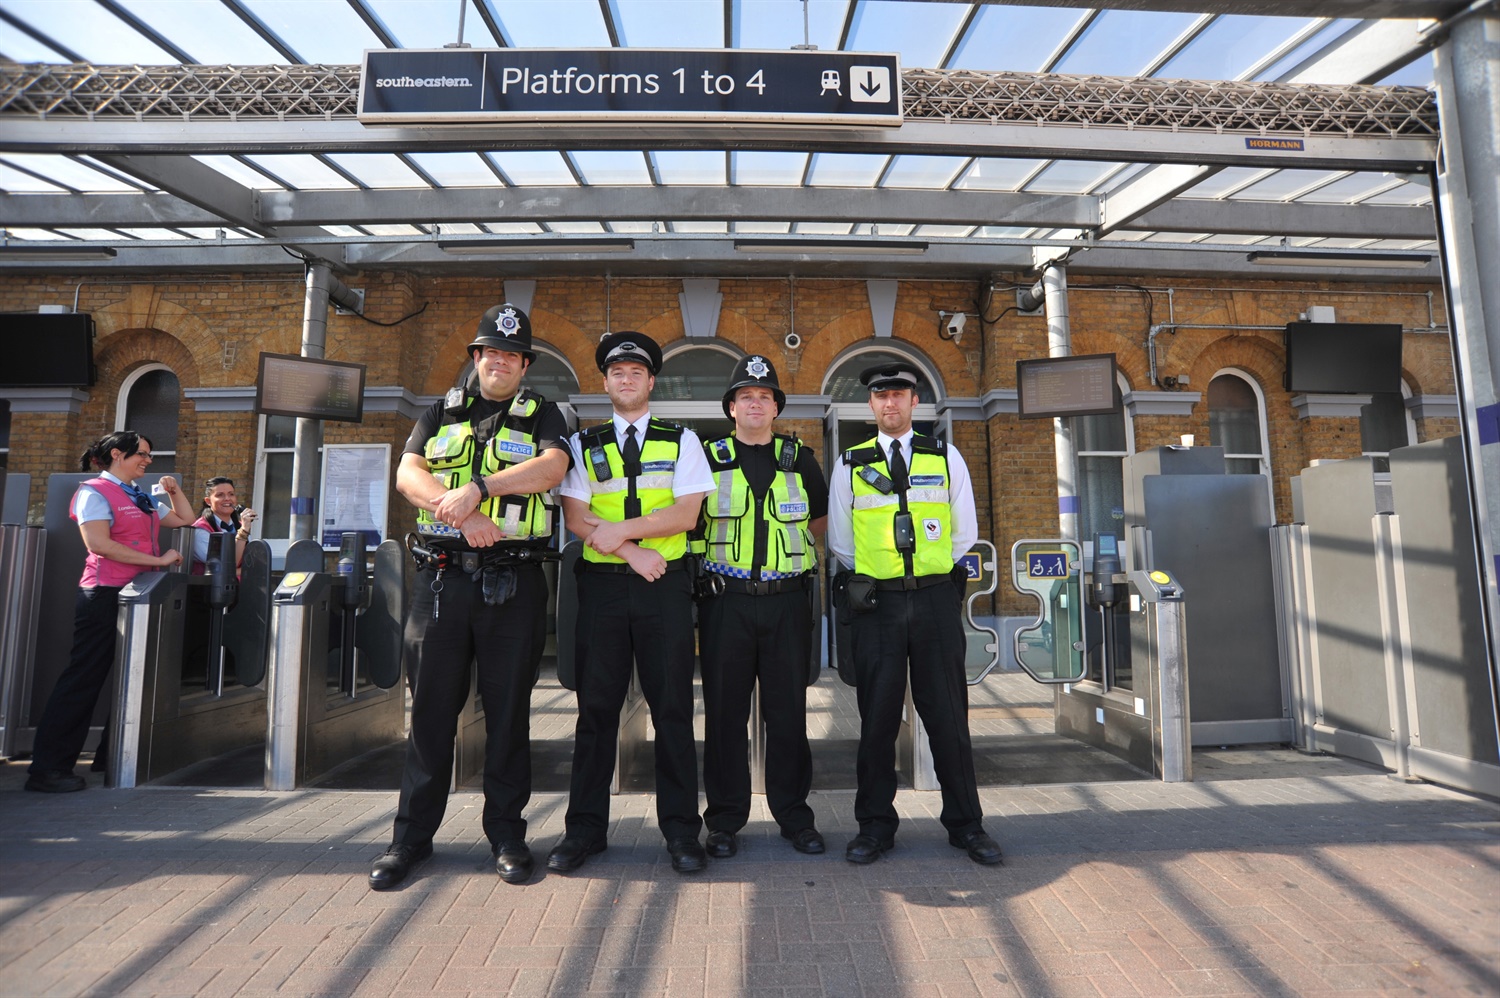 Recent security improvements on the UK’s rail network